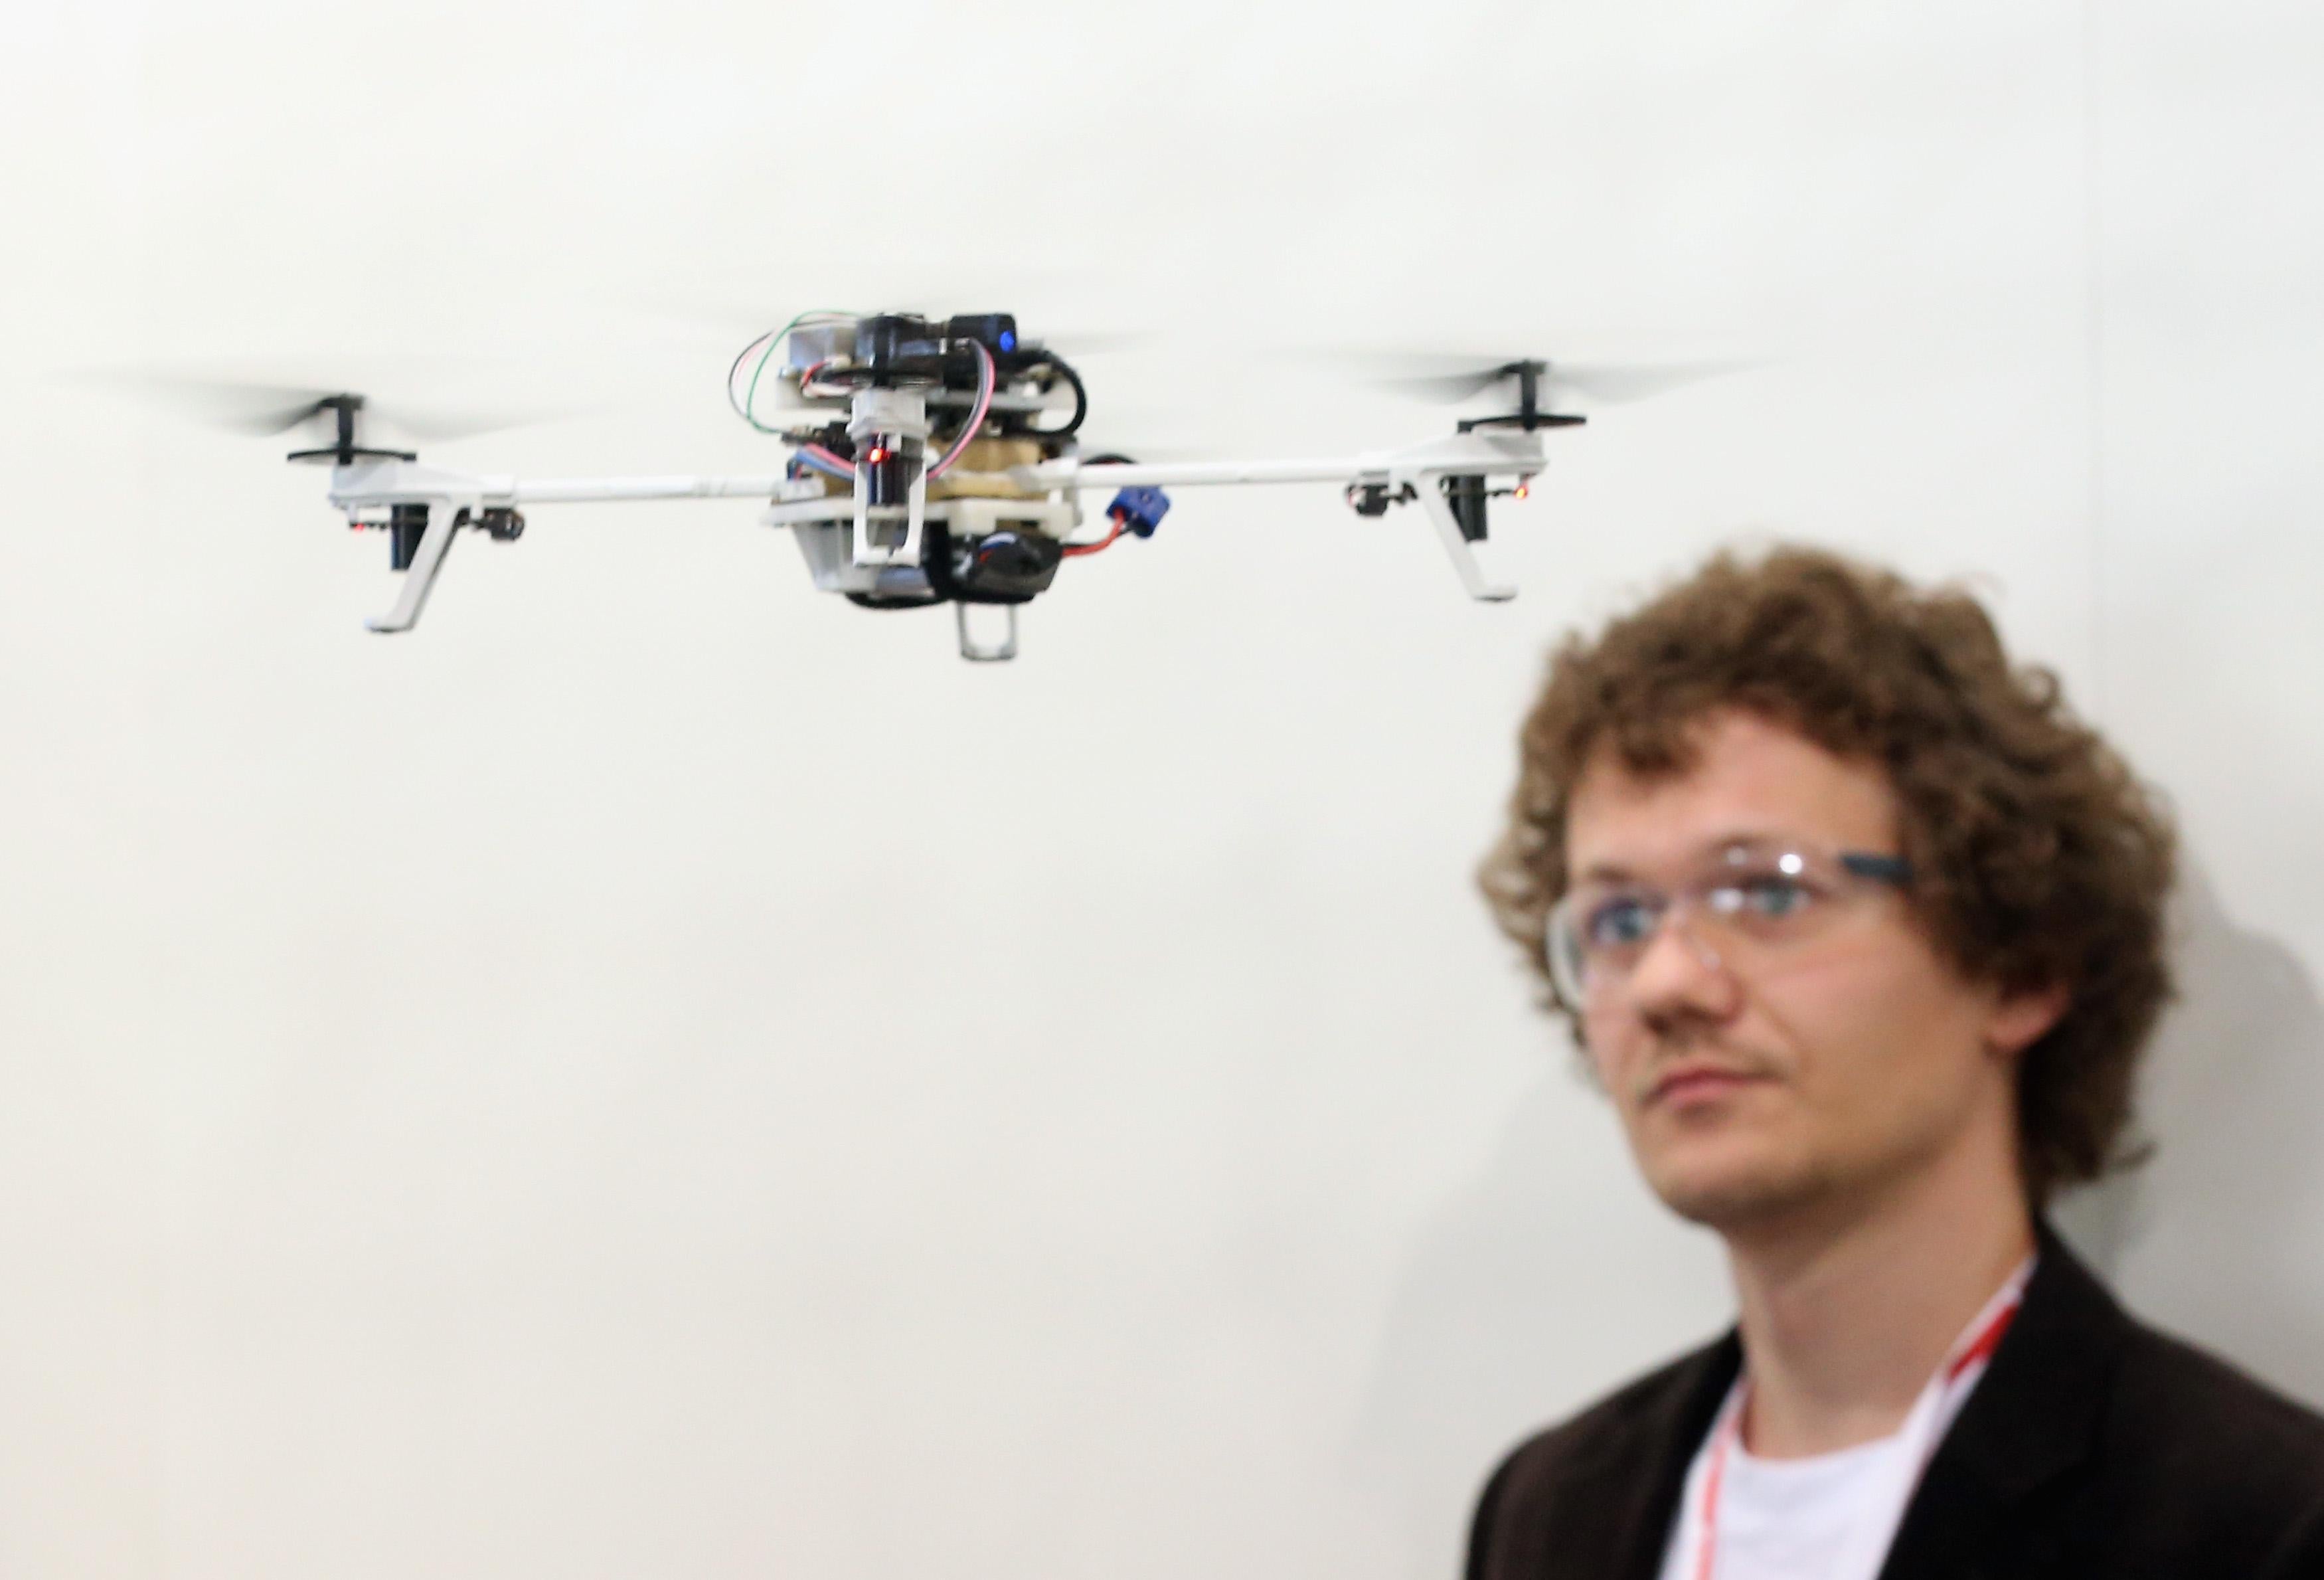 A student from the University of Zurich watches a drone.